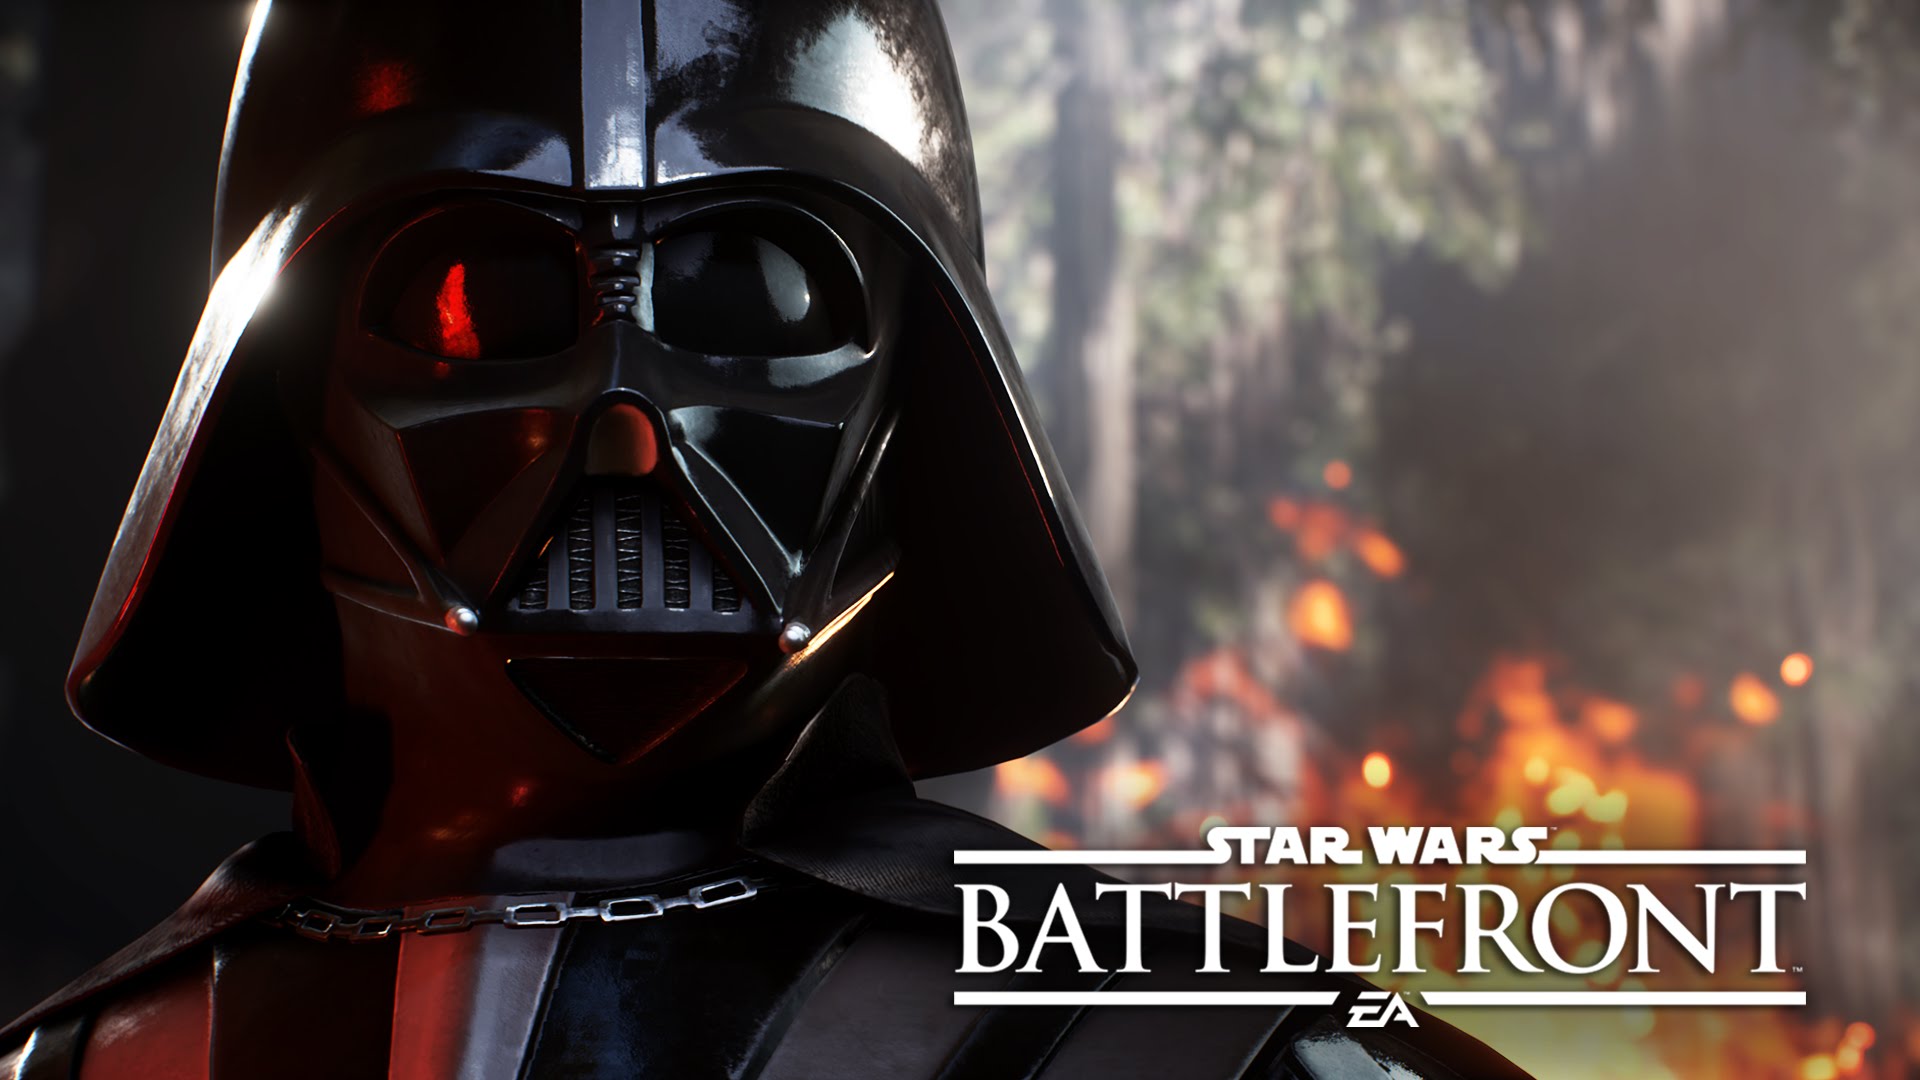 150+ Star Wars Battlefront (2015) HD Wallpapers and Backgrounds